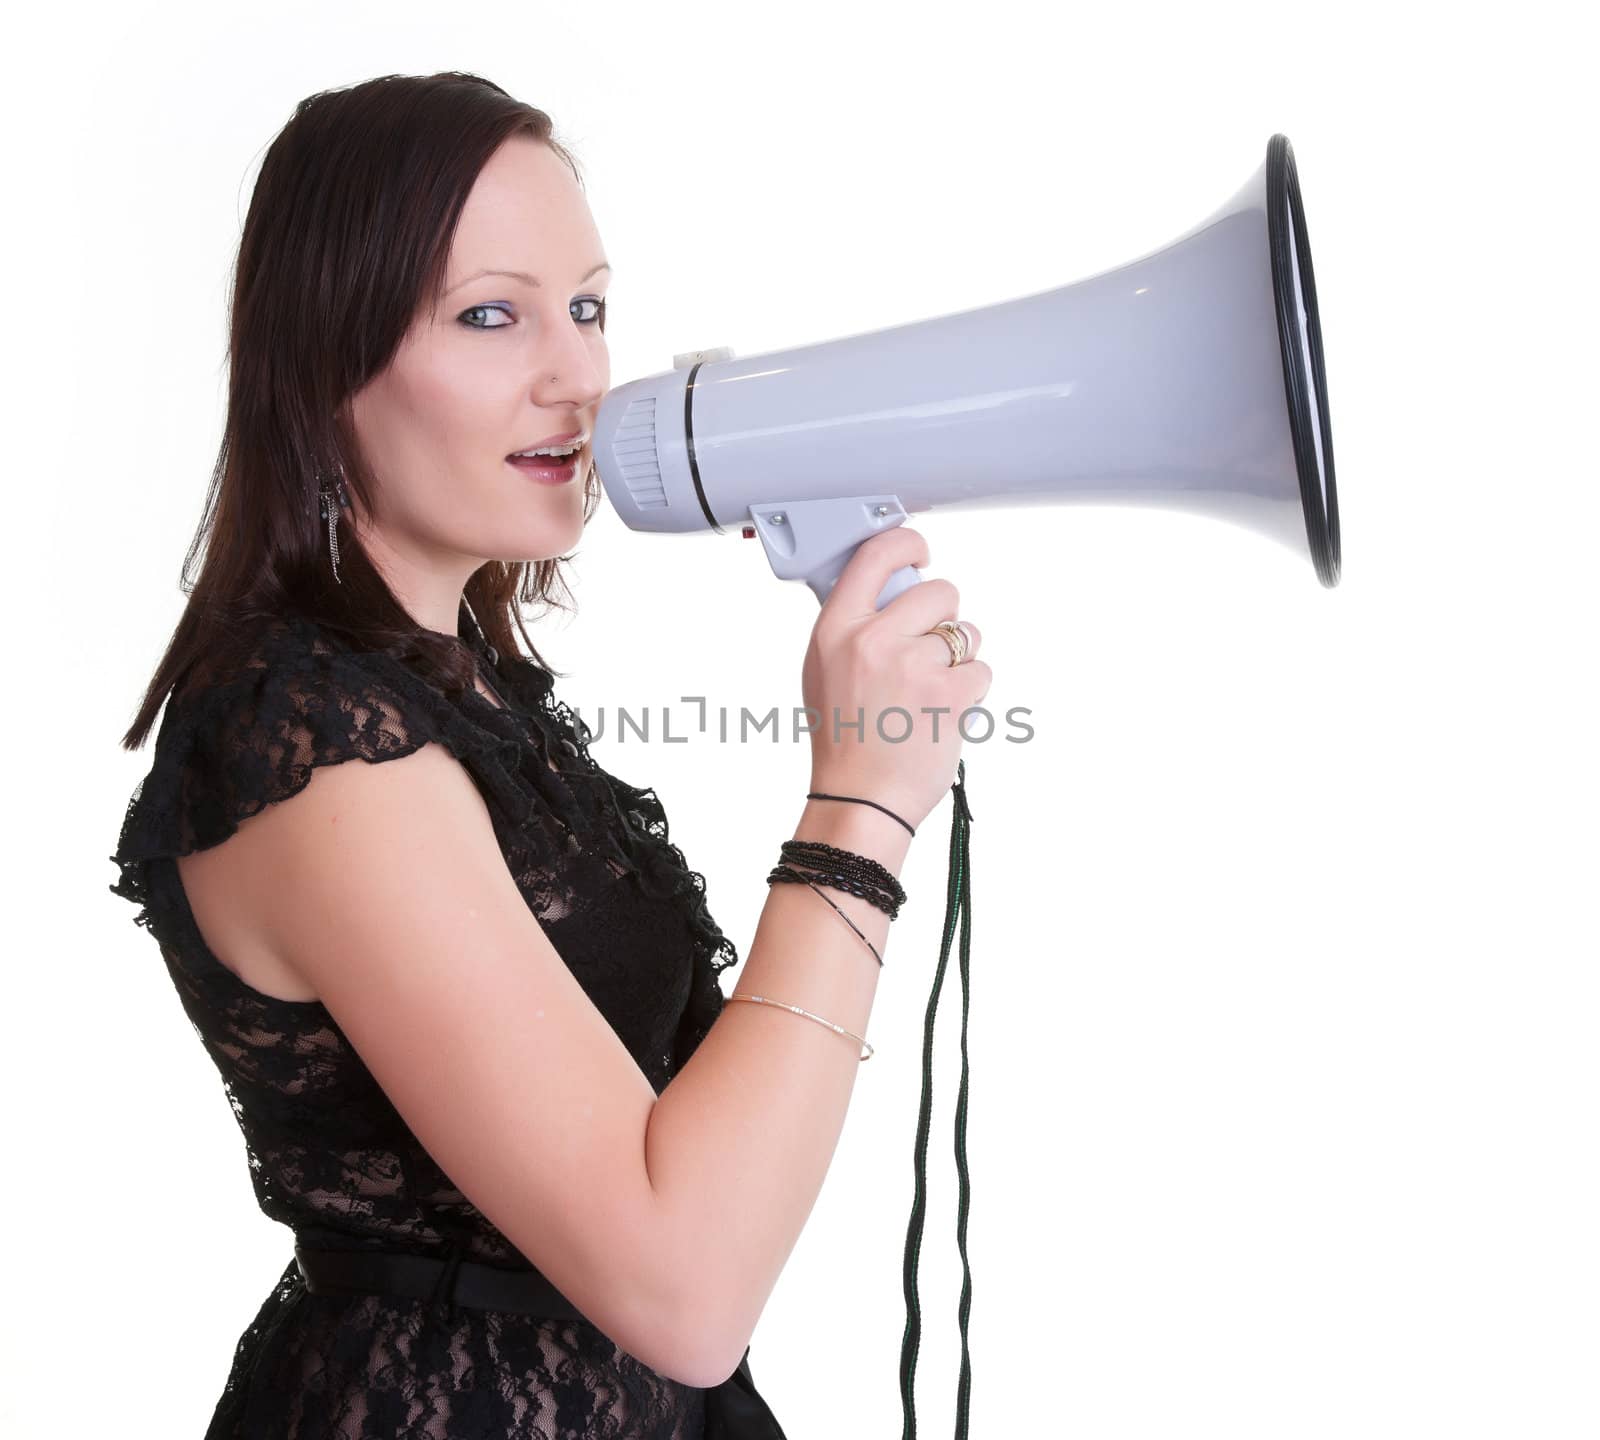 young woman with megaphone by clearviewstock